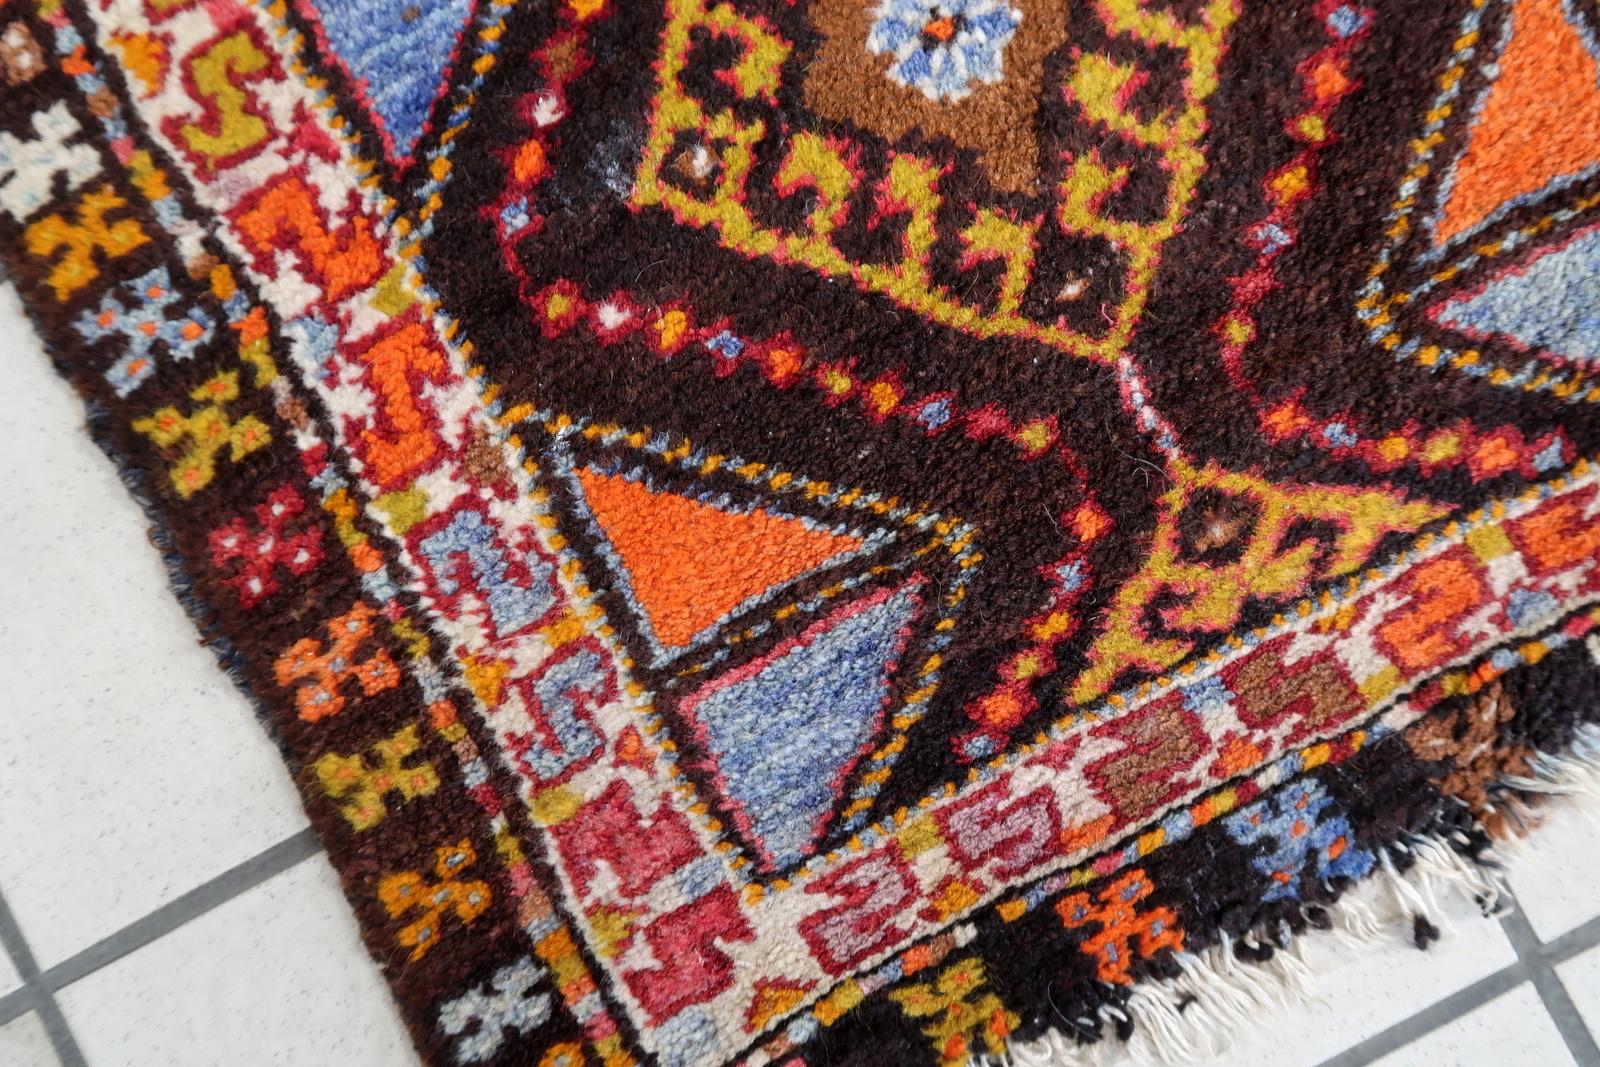 Condition: This rug is in its original good condition, retaining its beauty and charm through the years.
Circa: Crafted around the 1950s, it's a testament to the enduring artistry of Turkish rug-making.

Size: Measuring 1.7' x 2.6' (54cm x 80cm),